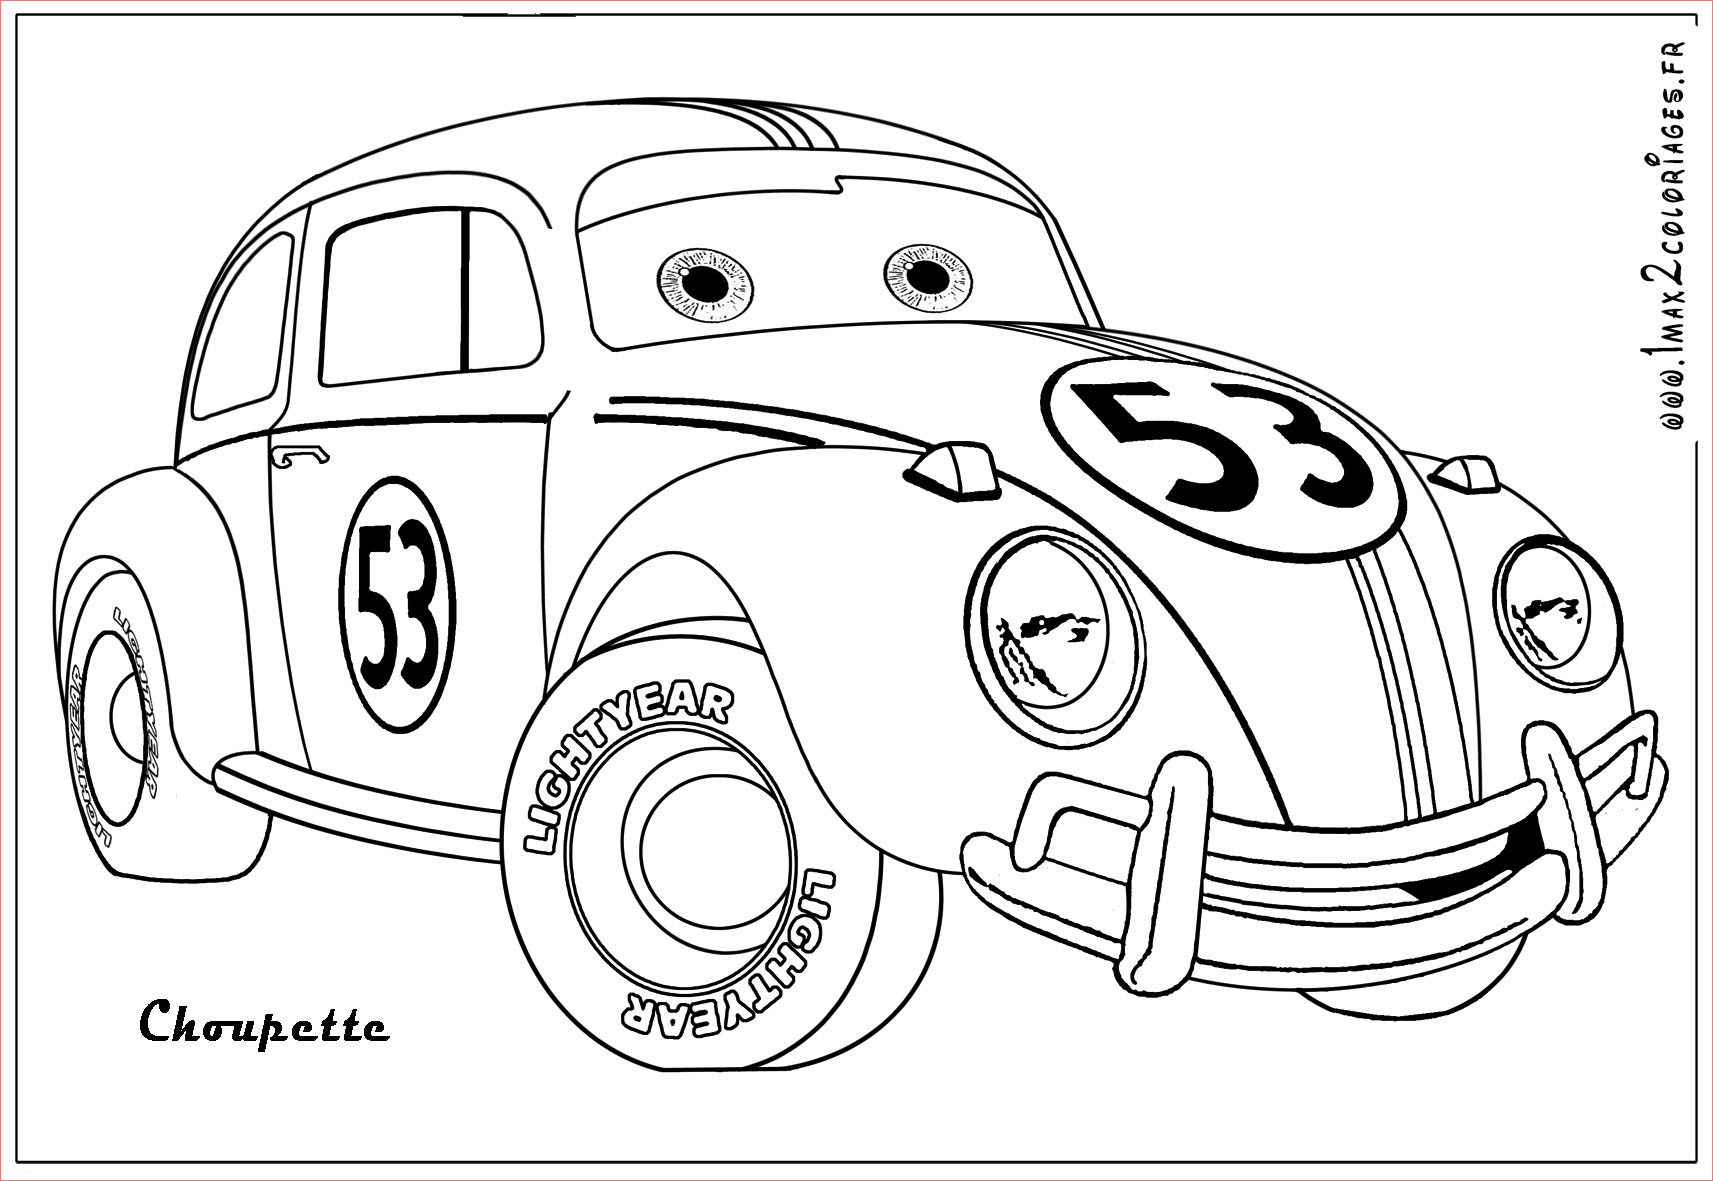 coloriage de voiture fast and furious